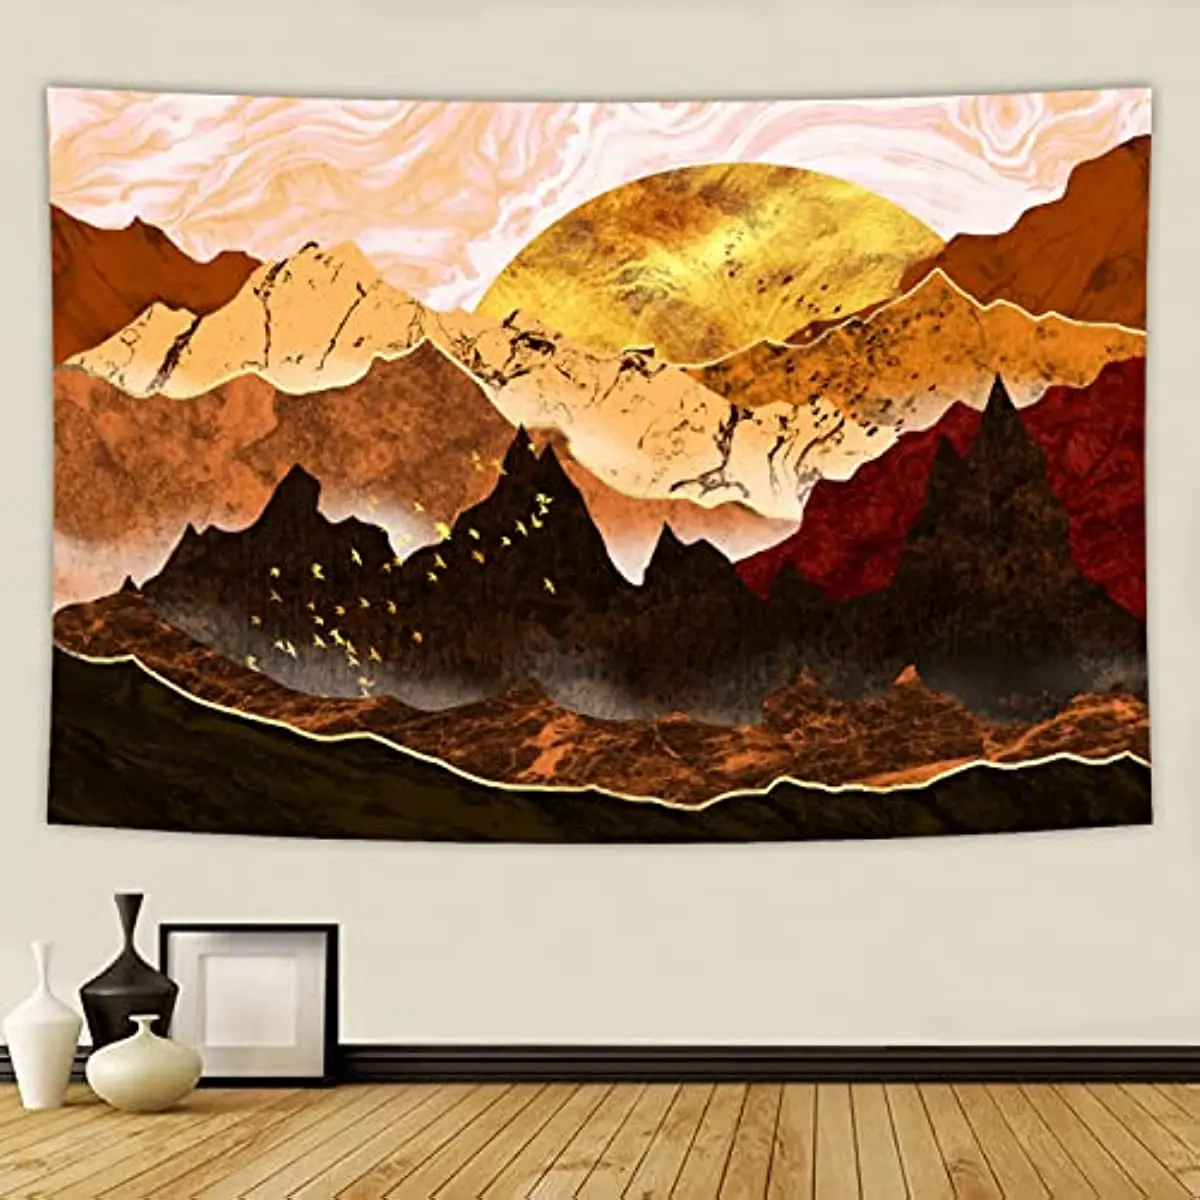 

Mountain Forest Trees Art Tapestry Sunset Nature Landscape Wall Hanging Tapestry Decor for Bedroom Living Room Dorm